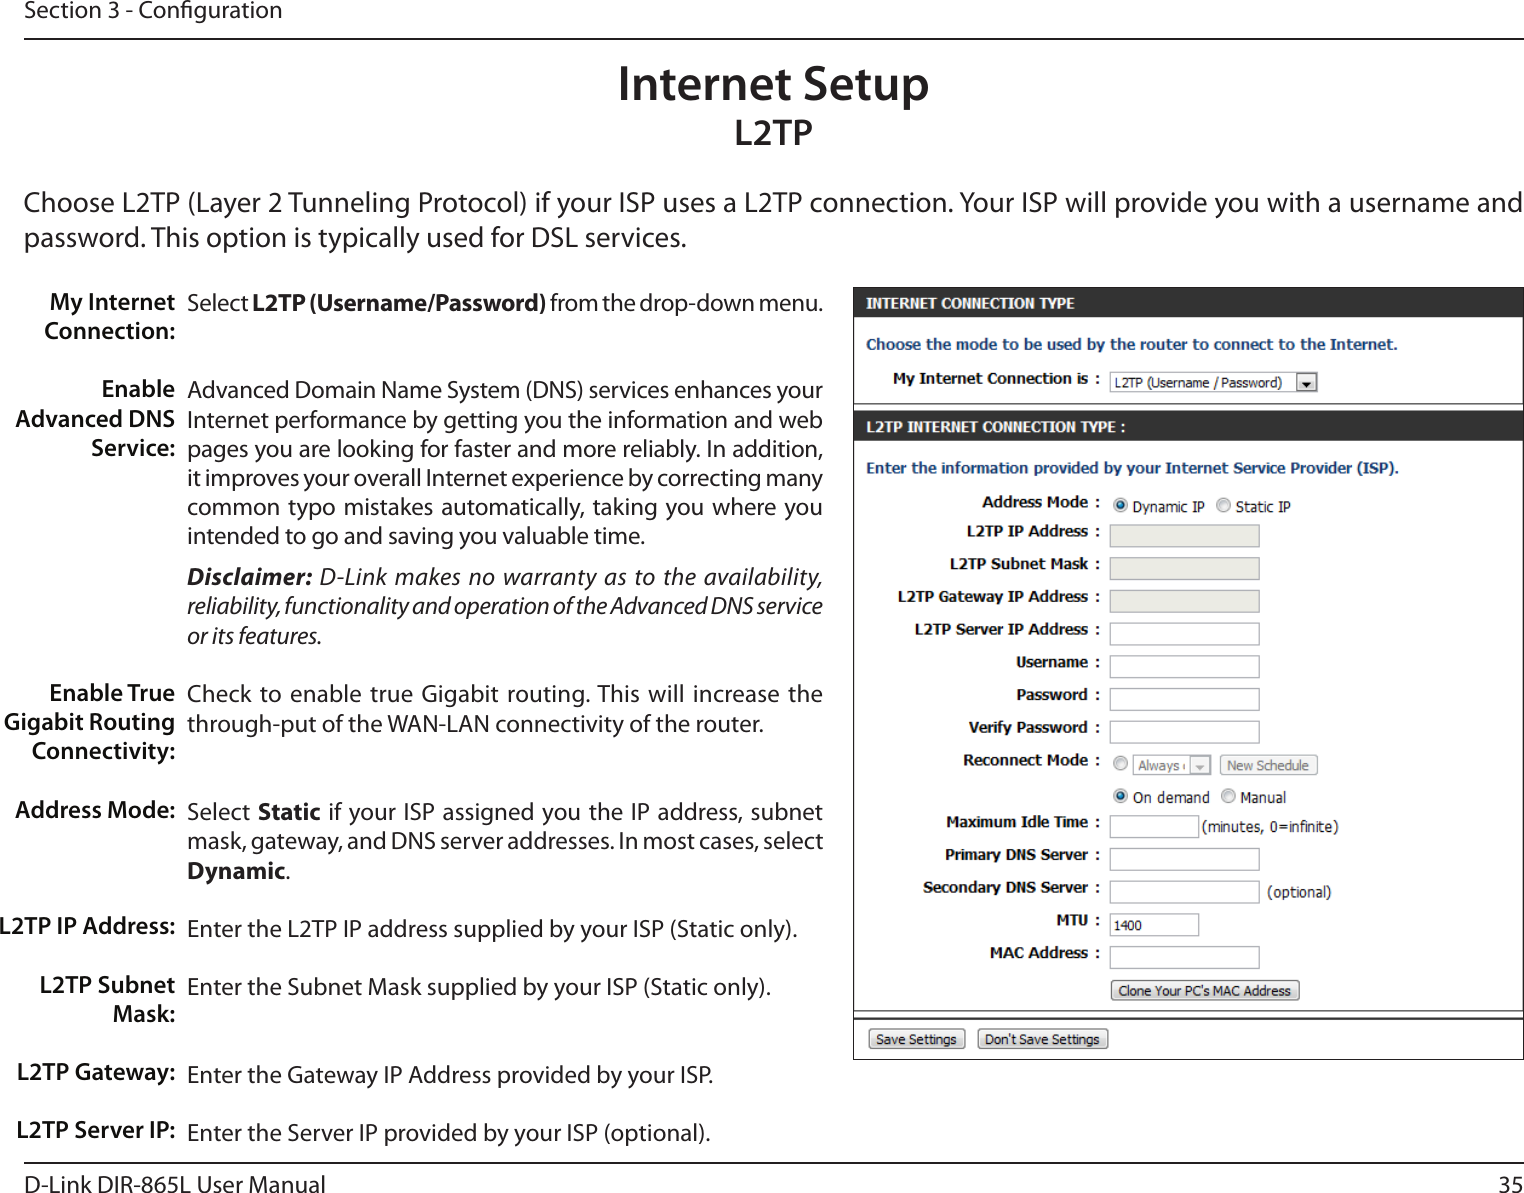 35D-Link DIR-865L User ManualSection 3 - CongurationSelect L2TP (Username/Password) from the drop-down menu.Advanced Domain Name System (DNS) services enhances your Internet performance by getting you the information and web pages you are looking for faster and more reliably. In addition, it improves your overall Internet experience by correcting many common typo mistakes automatically, taking you where you intended to go and saving you valuable time.Disclaimer: D-Link makes no warranty as to the availability, reliability, functionality and operation of the Advanced DNS service or its features.Check to enable true Gigabit routing. This will increase the through-put of the WAN-LAN connectivity of the router.Select Static if your ISP assigned you the IP address, subnet mask, gateway, and DNS server addresses. In most cases, select Dynamic.Enter the L2TP IP address supplied by your ISP (Static only).Enter the Subnet Mask supplied by your ISP (Static only).Enter the Gateway IP Address provided by your ISP.Enter the Server IP provided by your ISP (optional).My Internet Connection:Enable Advanced DNS Service:Enable True Gigabit Routing Connectivity:Address Mode:L2TP IP Address:L2TP Subnet Mask:L2TP Gateway:L2TP Server IP:Internet SetupL2TPChoose L2TP (Layer 2 Tunneling Protocol) if your ISP uses a L2TP connection. Your ISP will provide you with a username and password. This option is typically used for DSL services. 